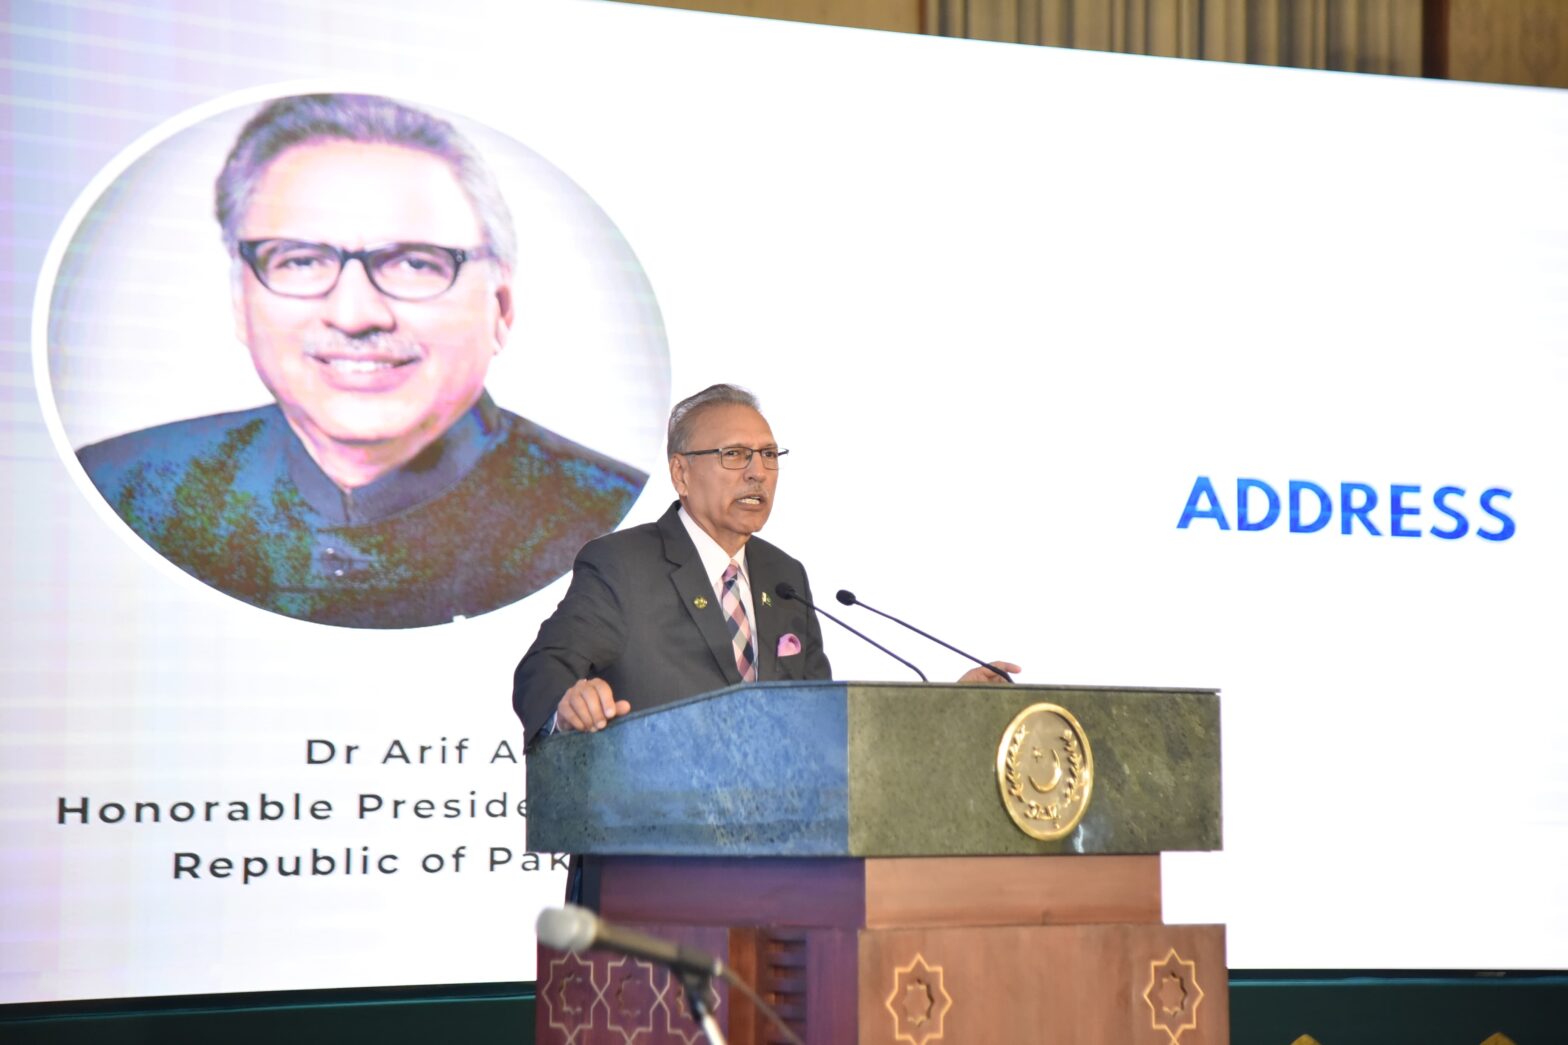 President for enabling environment to nurture youth’s intellectual abilities